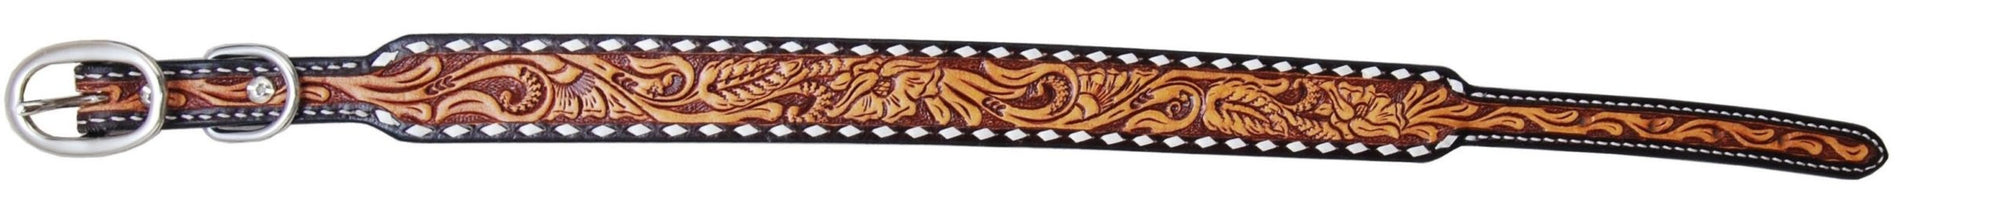 Rafter T Ranch Co Tooled Dog Collar STYLE RTDC378-L